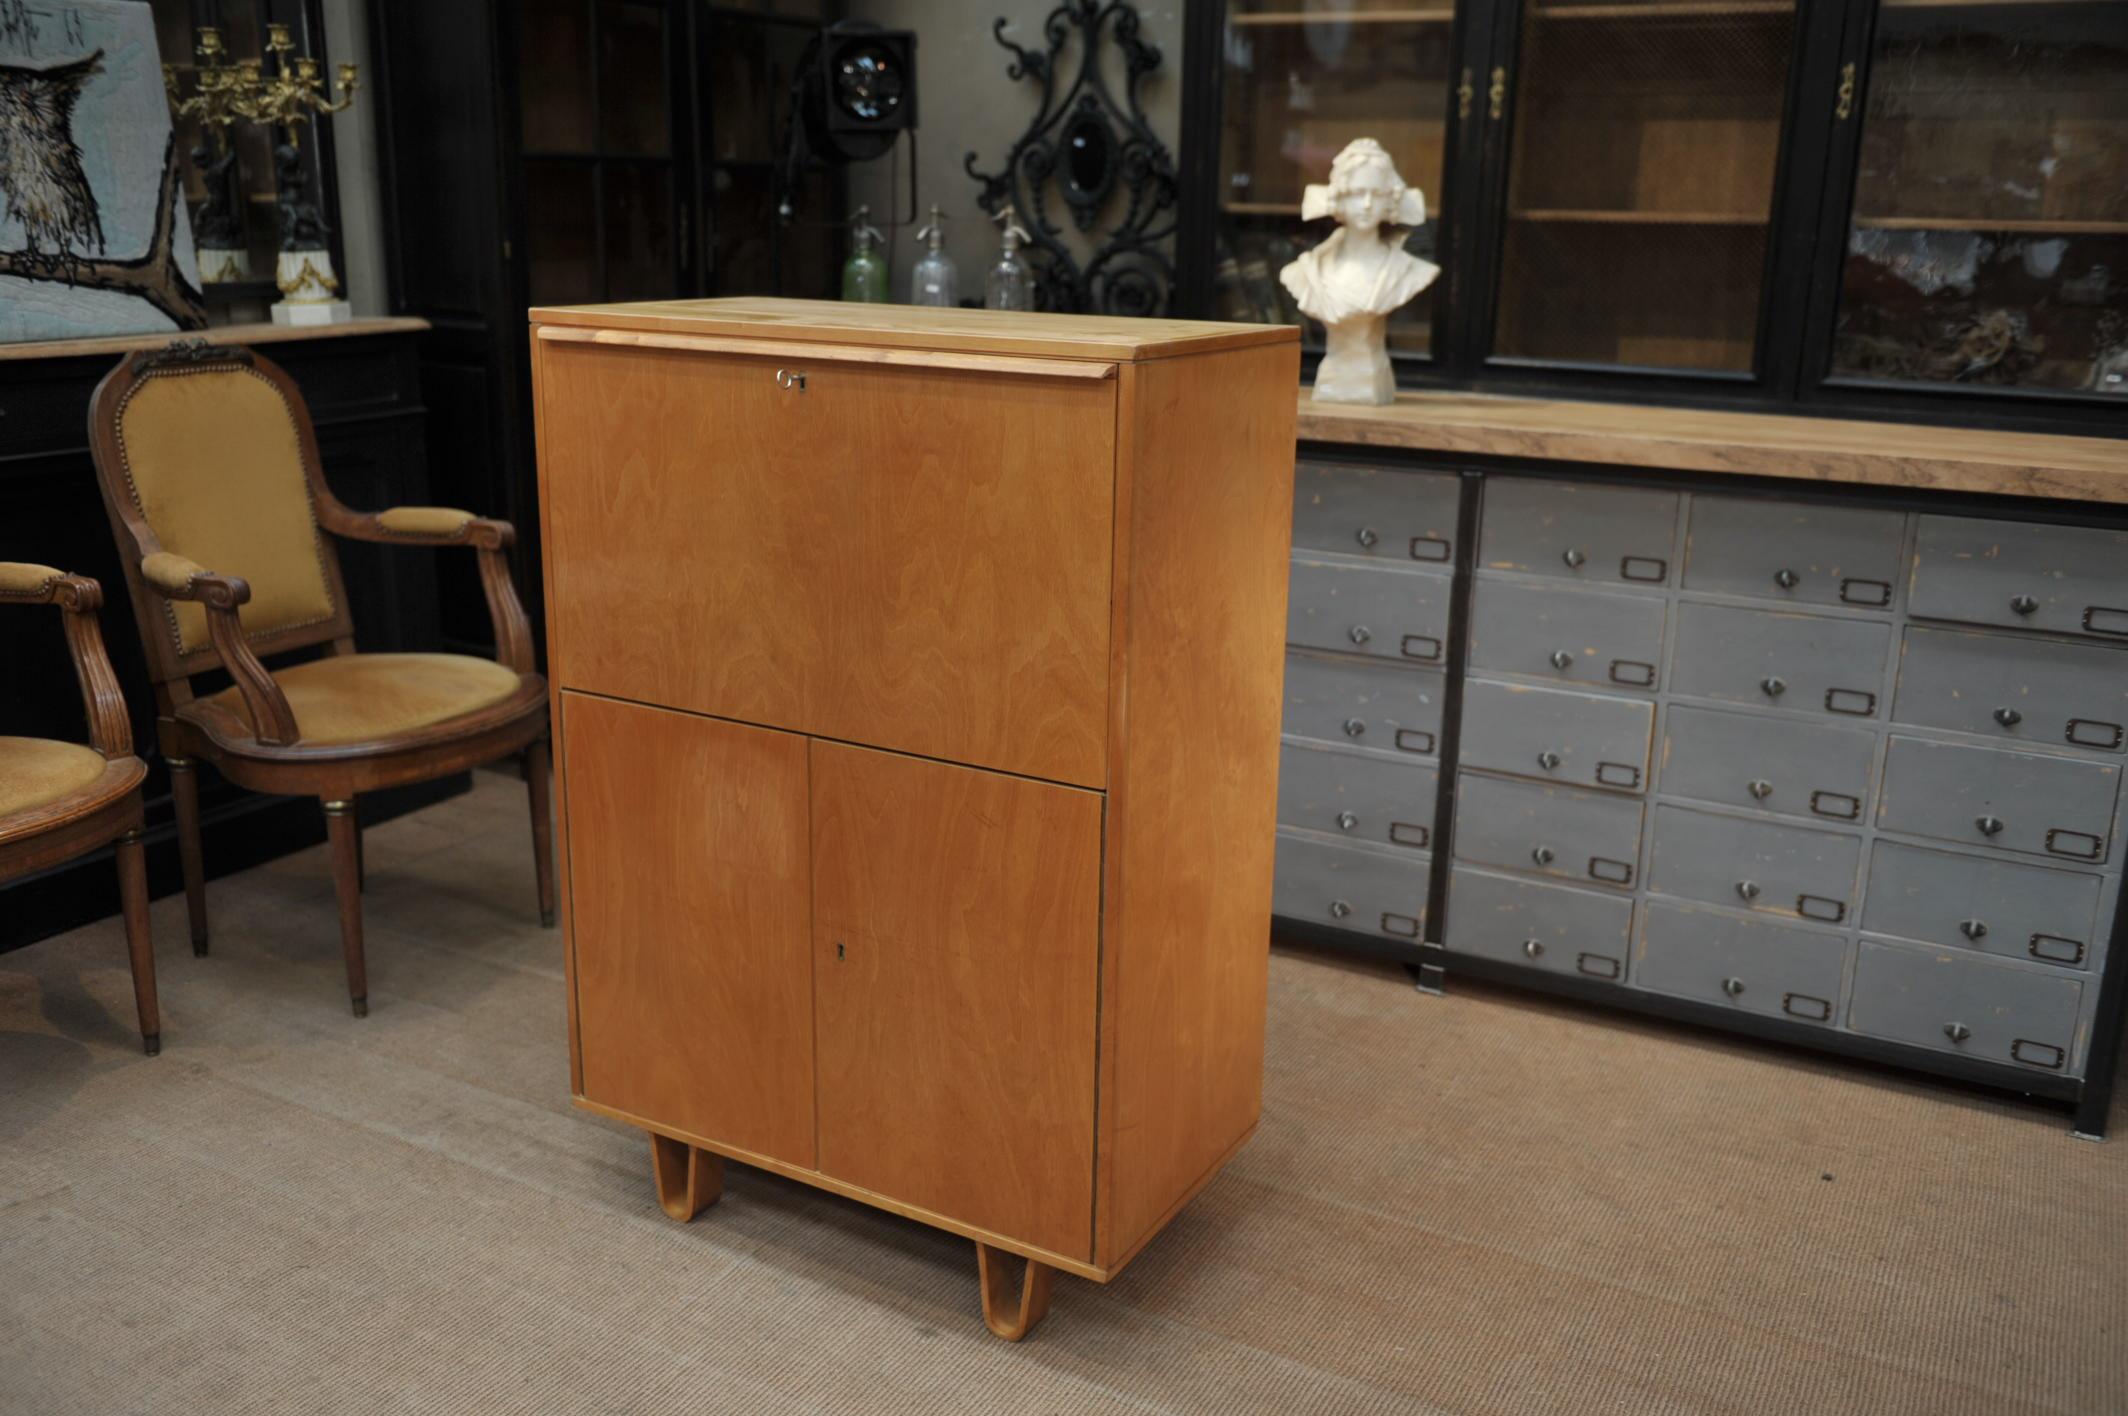 Bar or writing desk model CB07 in birch wood, 2 doors and one flap door an 2 drawers inside with original tag of retail seller designer: Cees Braakman for Pastoe, 1950s.